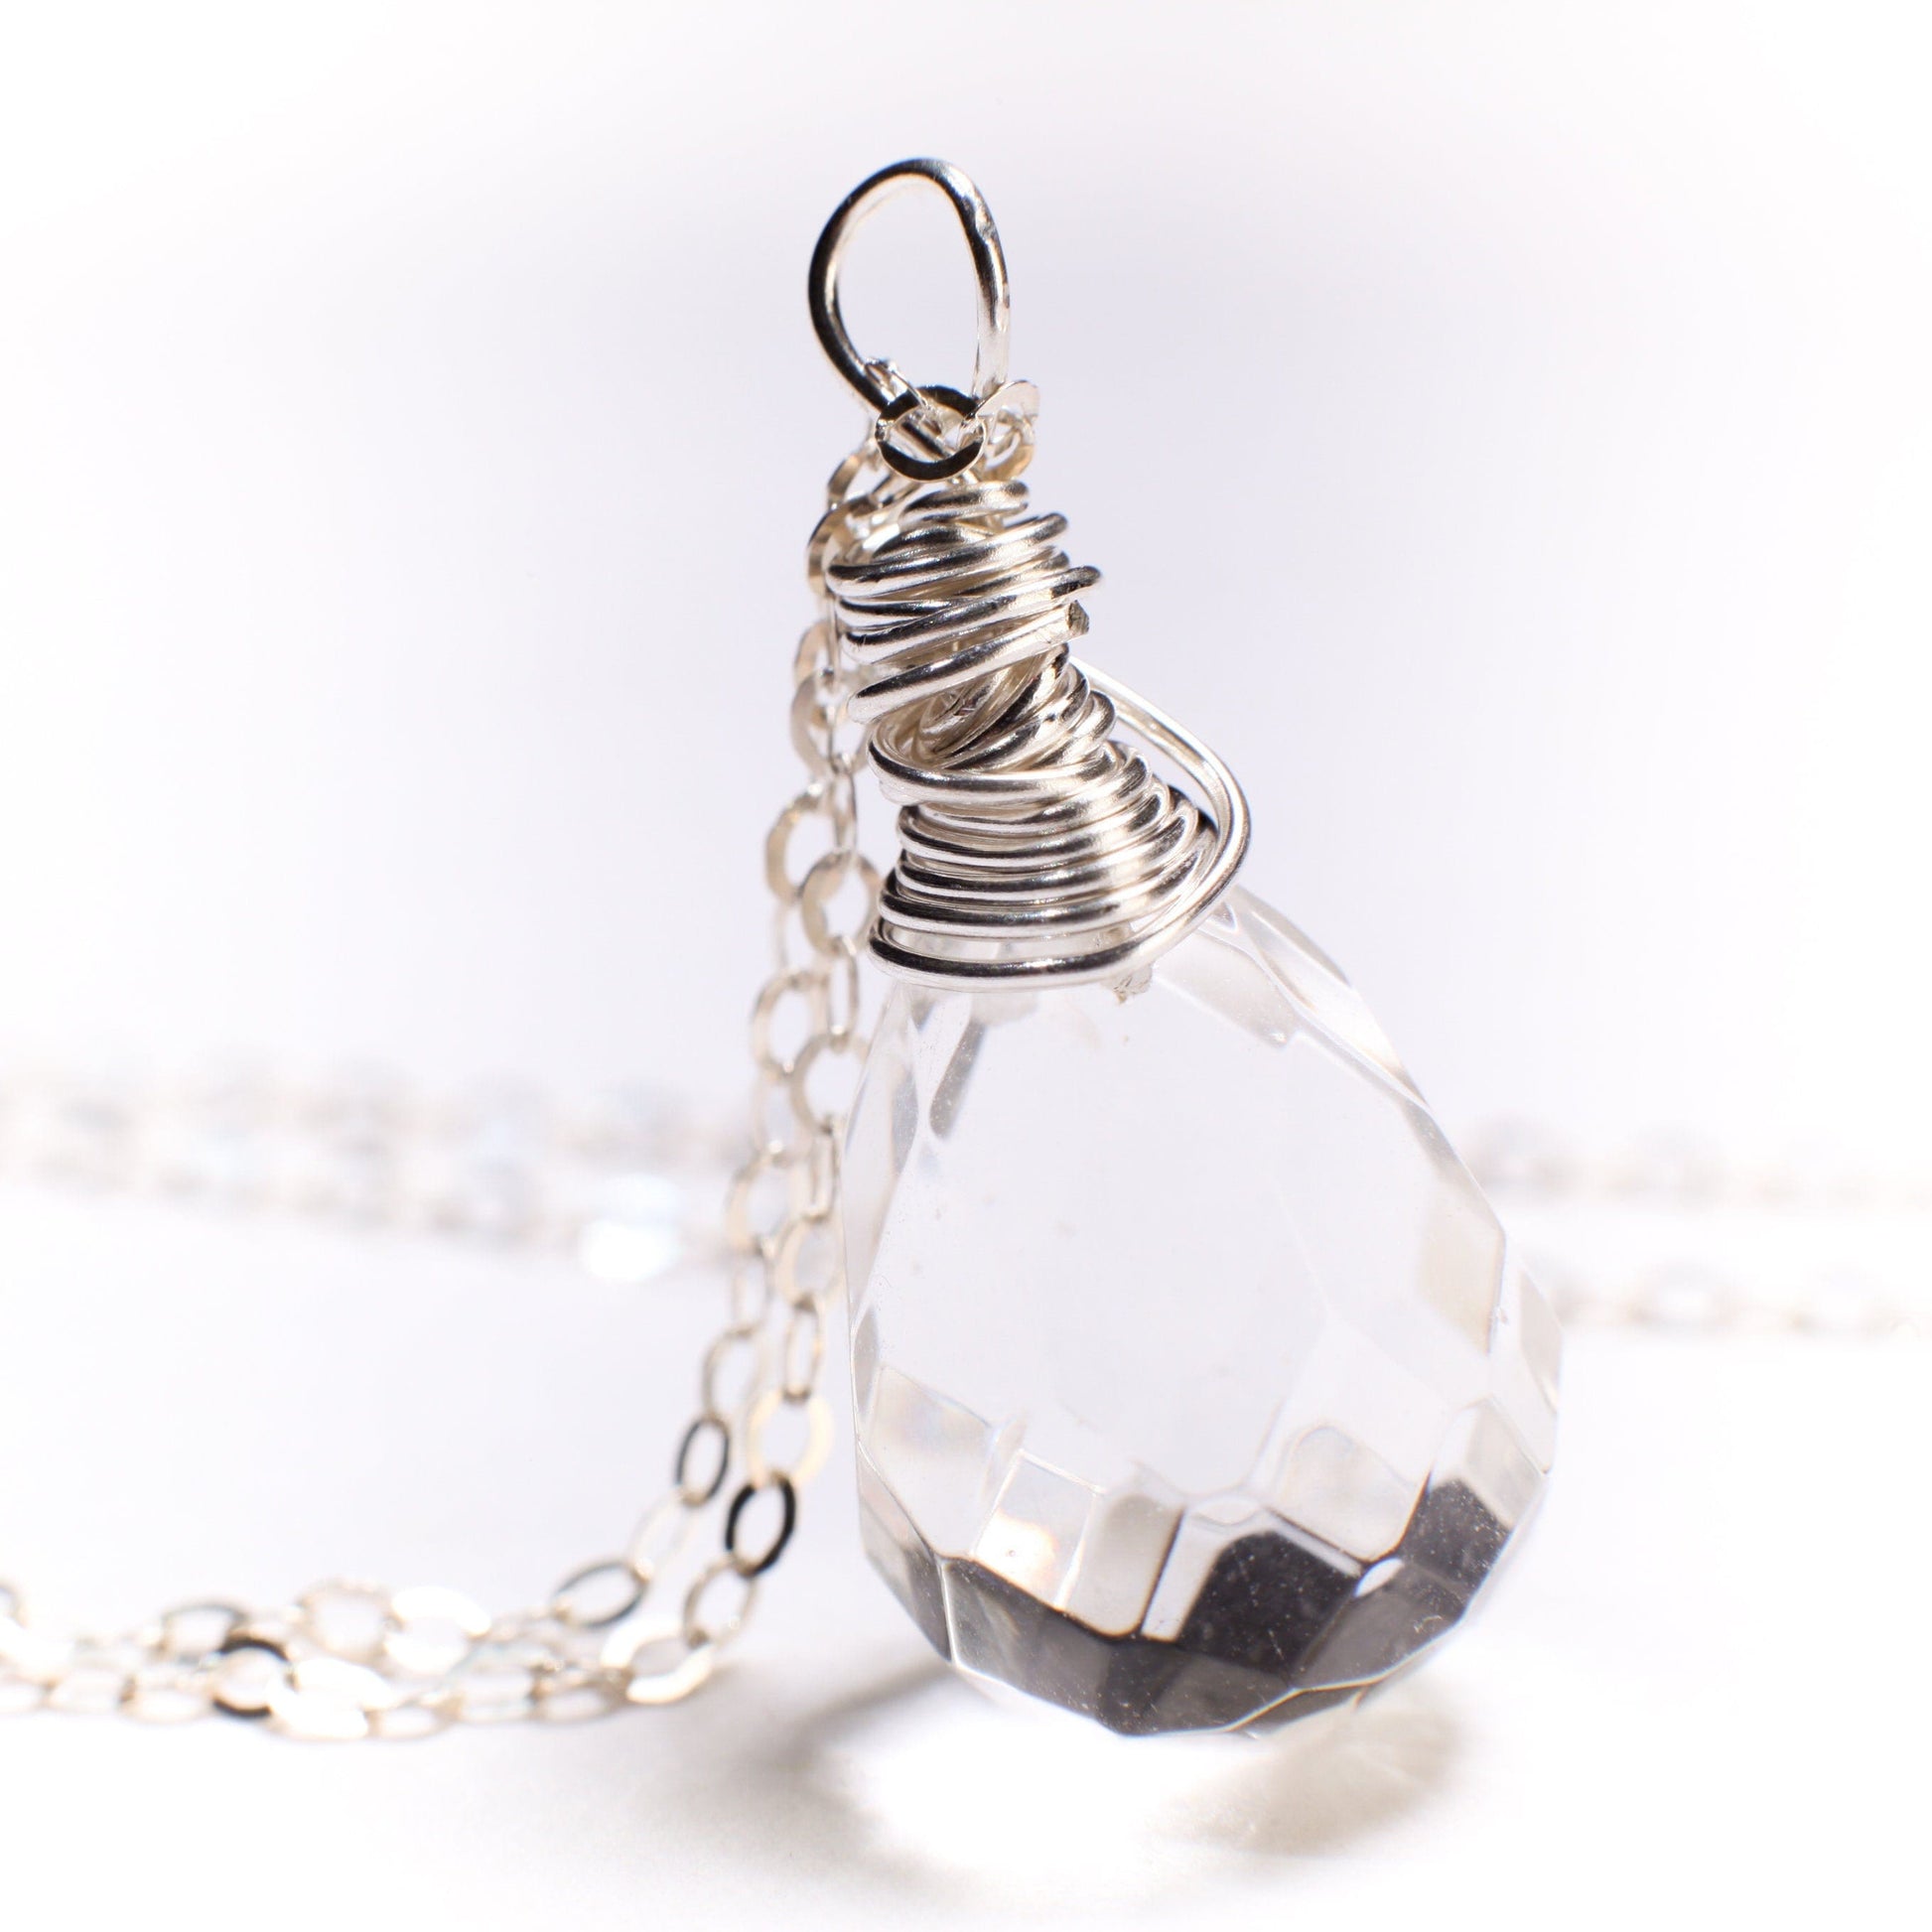 Natural Rock Crystal,Clear Quartz 12x17mm Faceted Briolette Drop Wire Wrapped Gemstone Pendant in 925 Sterling Silver Chain, necklace.